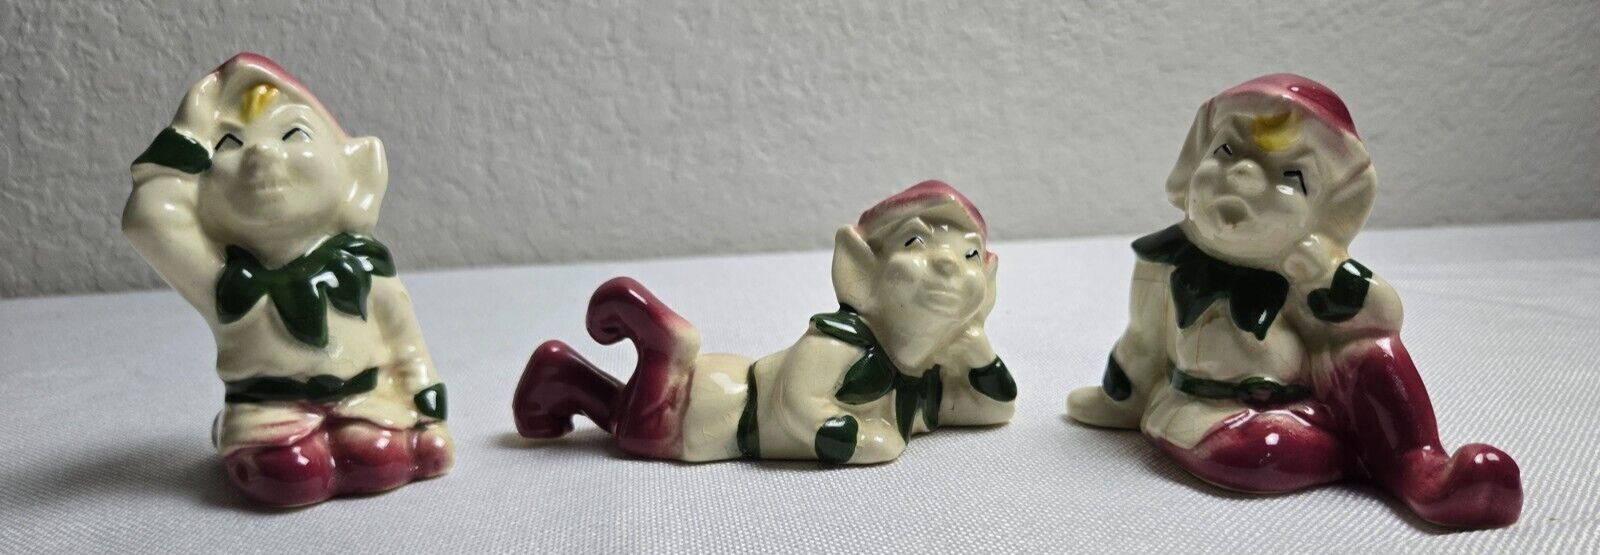 3 PC Vintage McCoy Elf Pixie Figurines Ceramic Red and Green